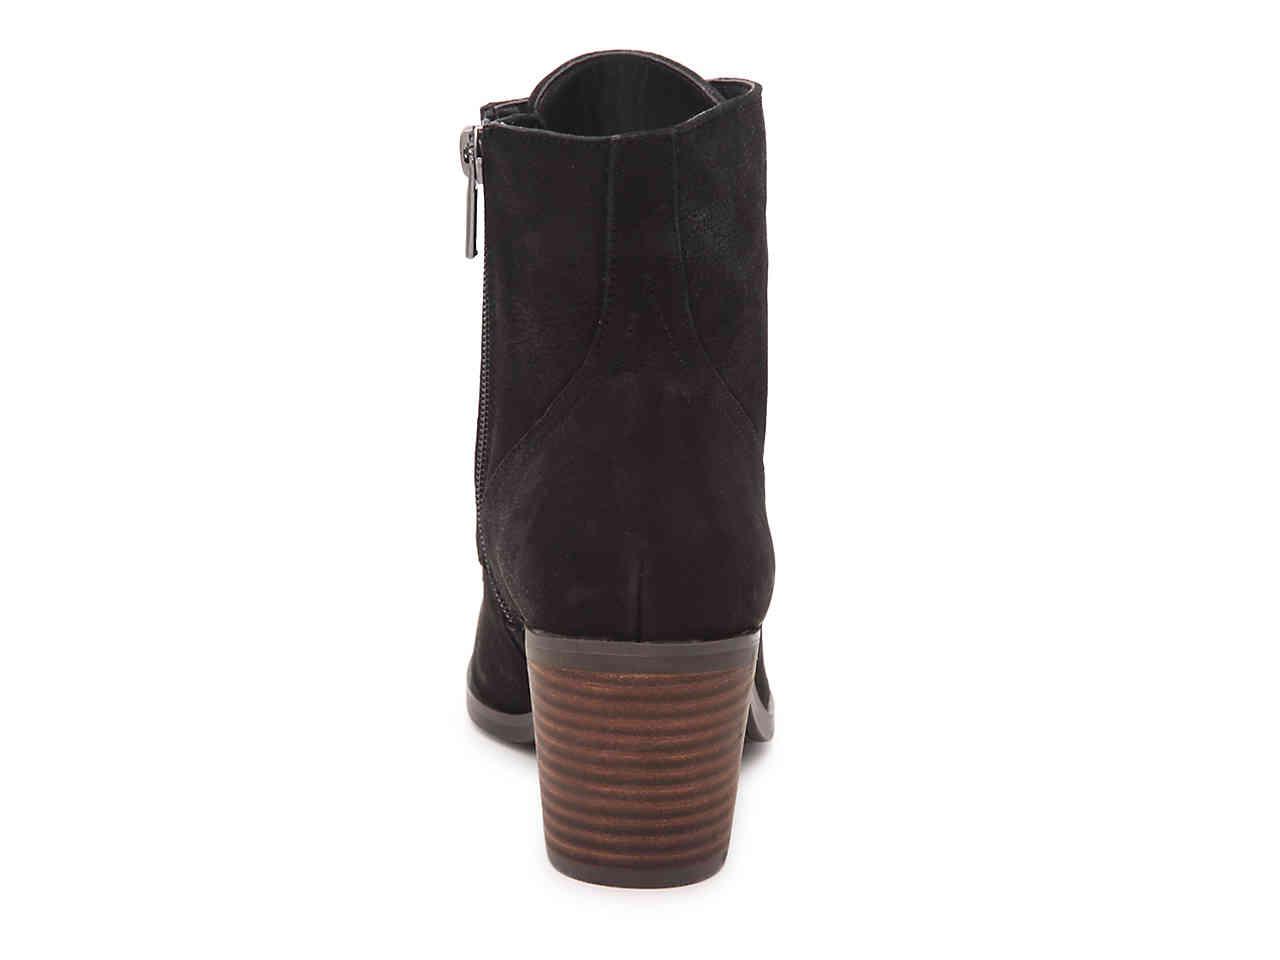 lucky brand persee bootie